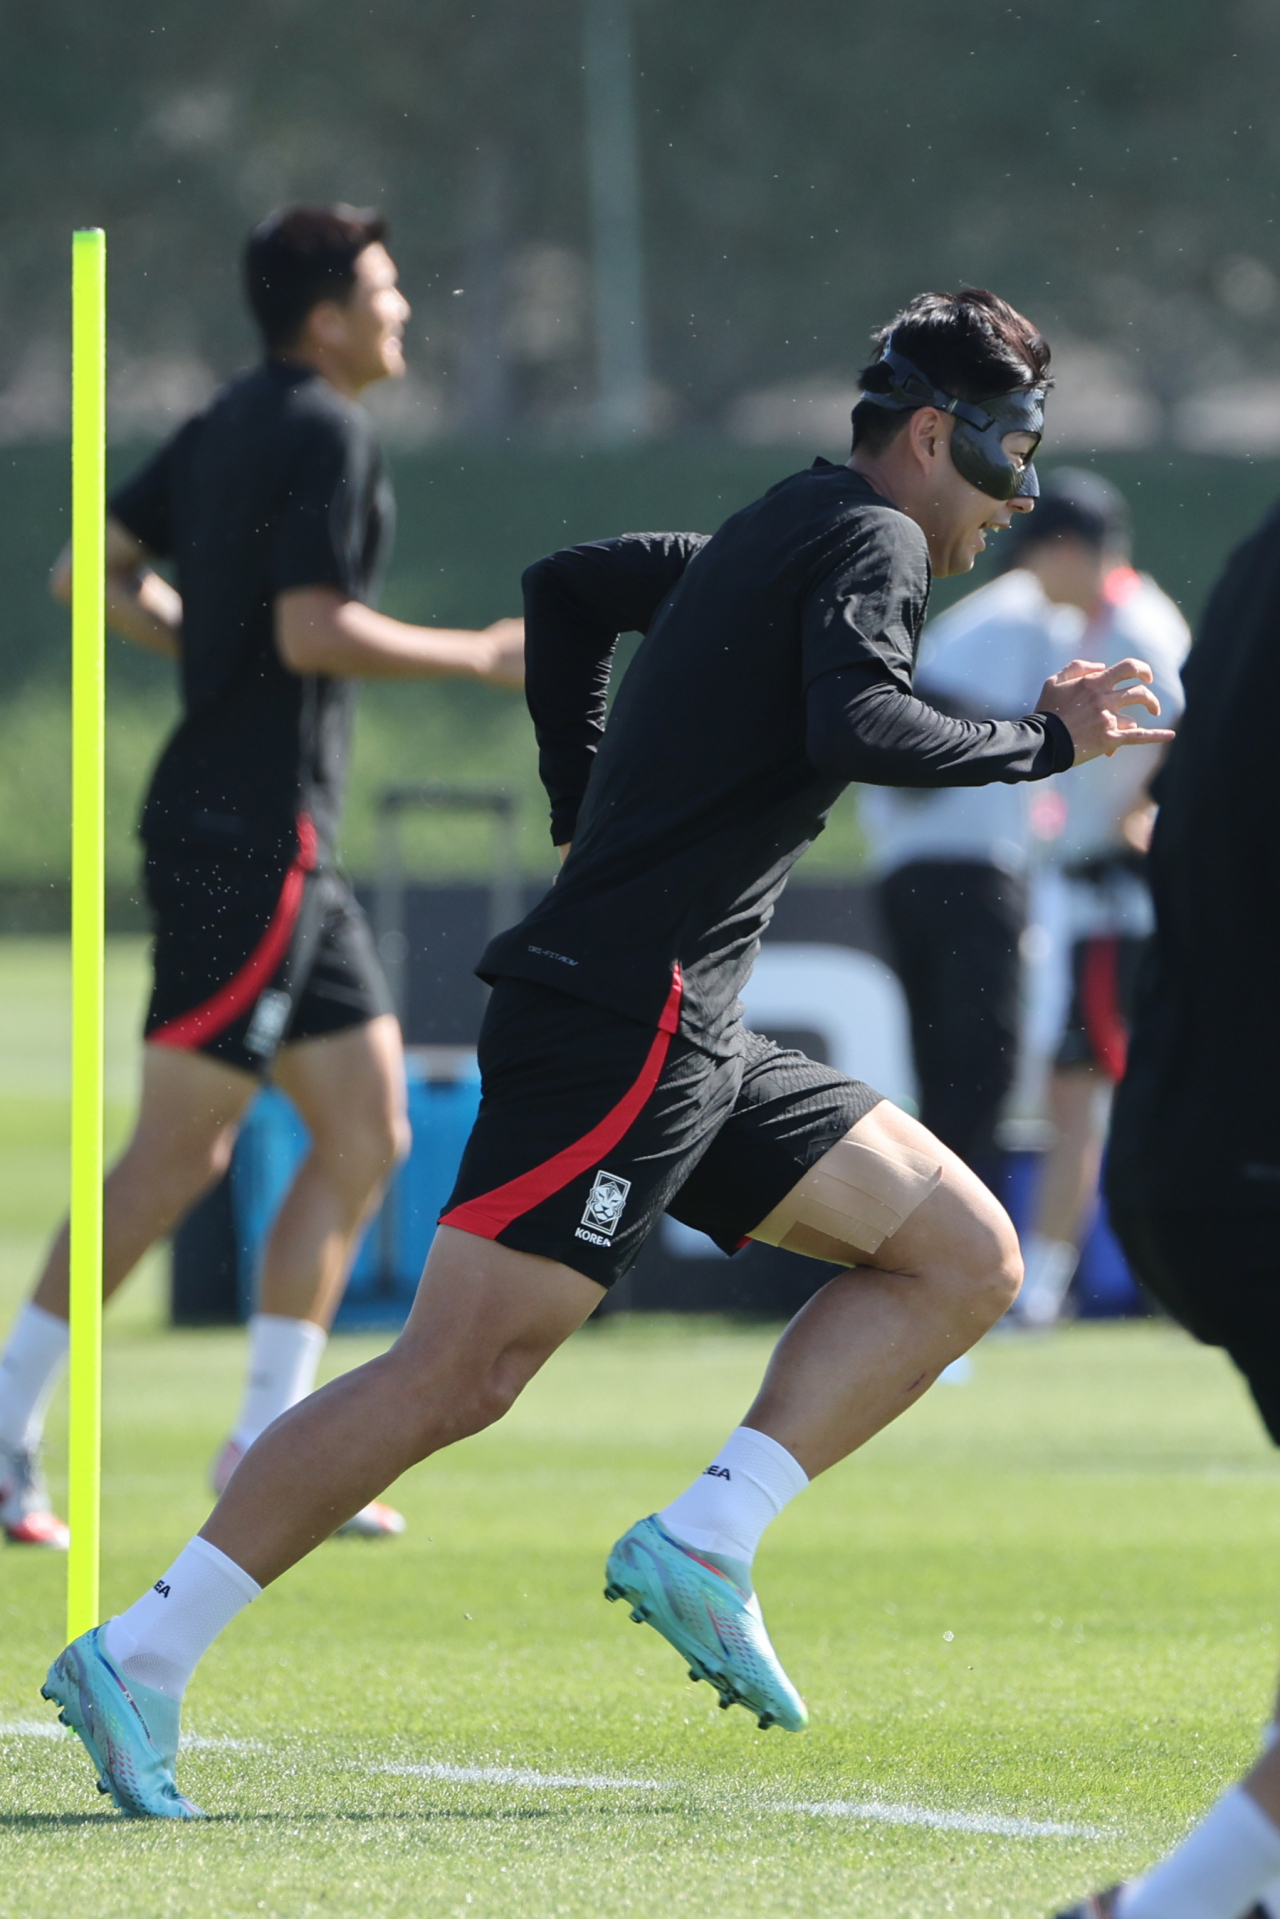 Son Heung-min of the South Korean national soccer team trains at the Al Egla Training Facility in Doha on Wednesday. (Yonhap)